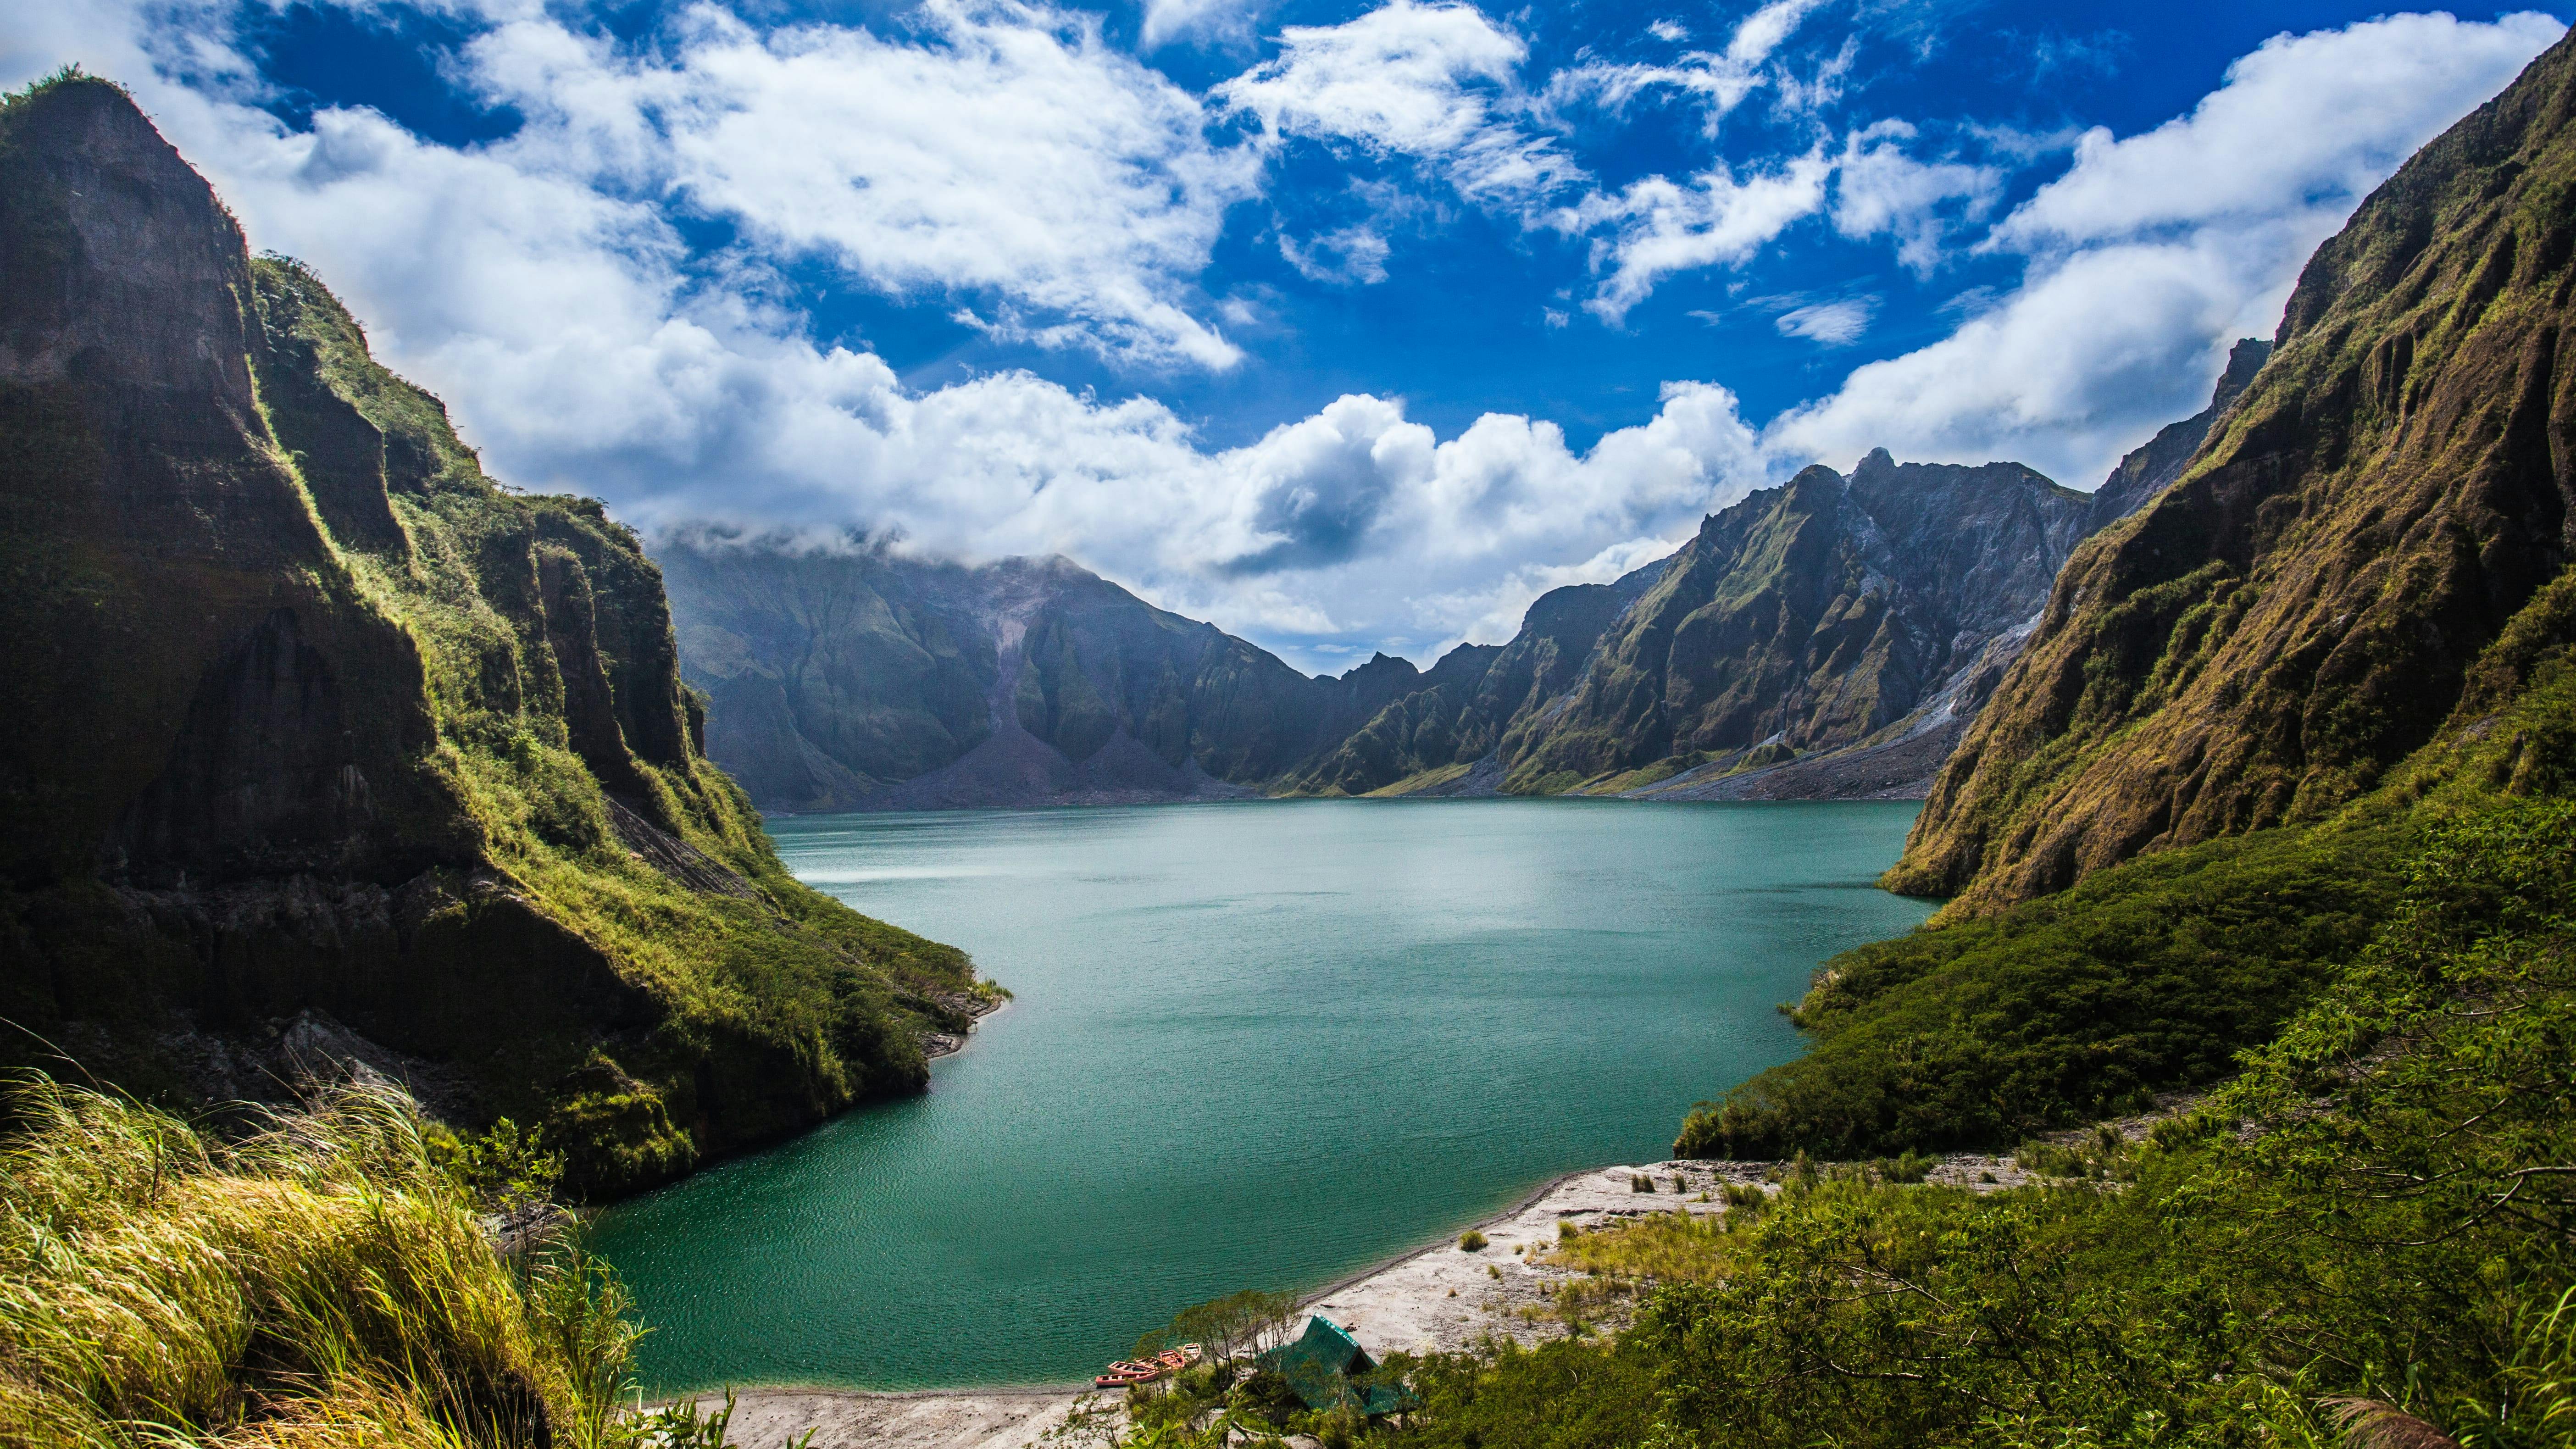 Postcard-worthy view of Mt. Pinatubo Crater Lake